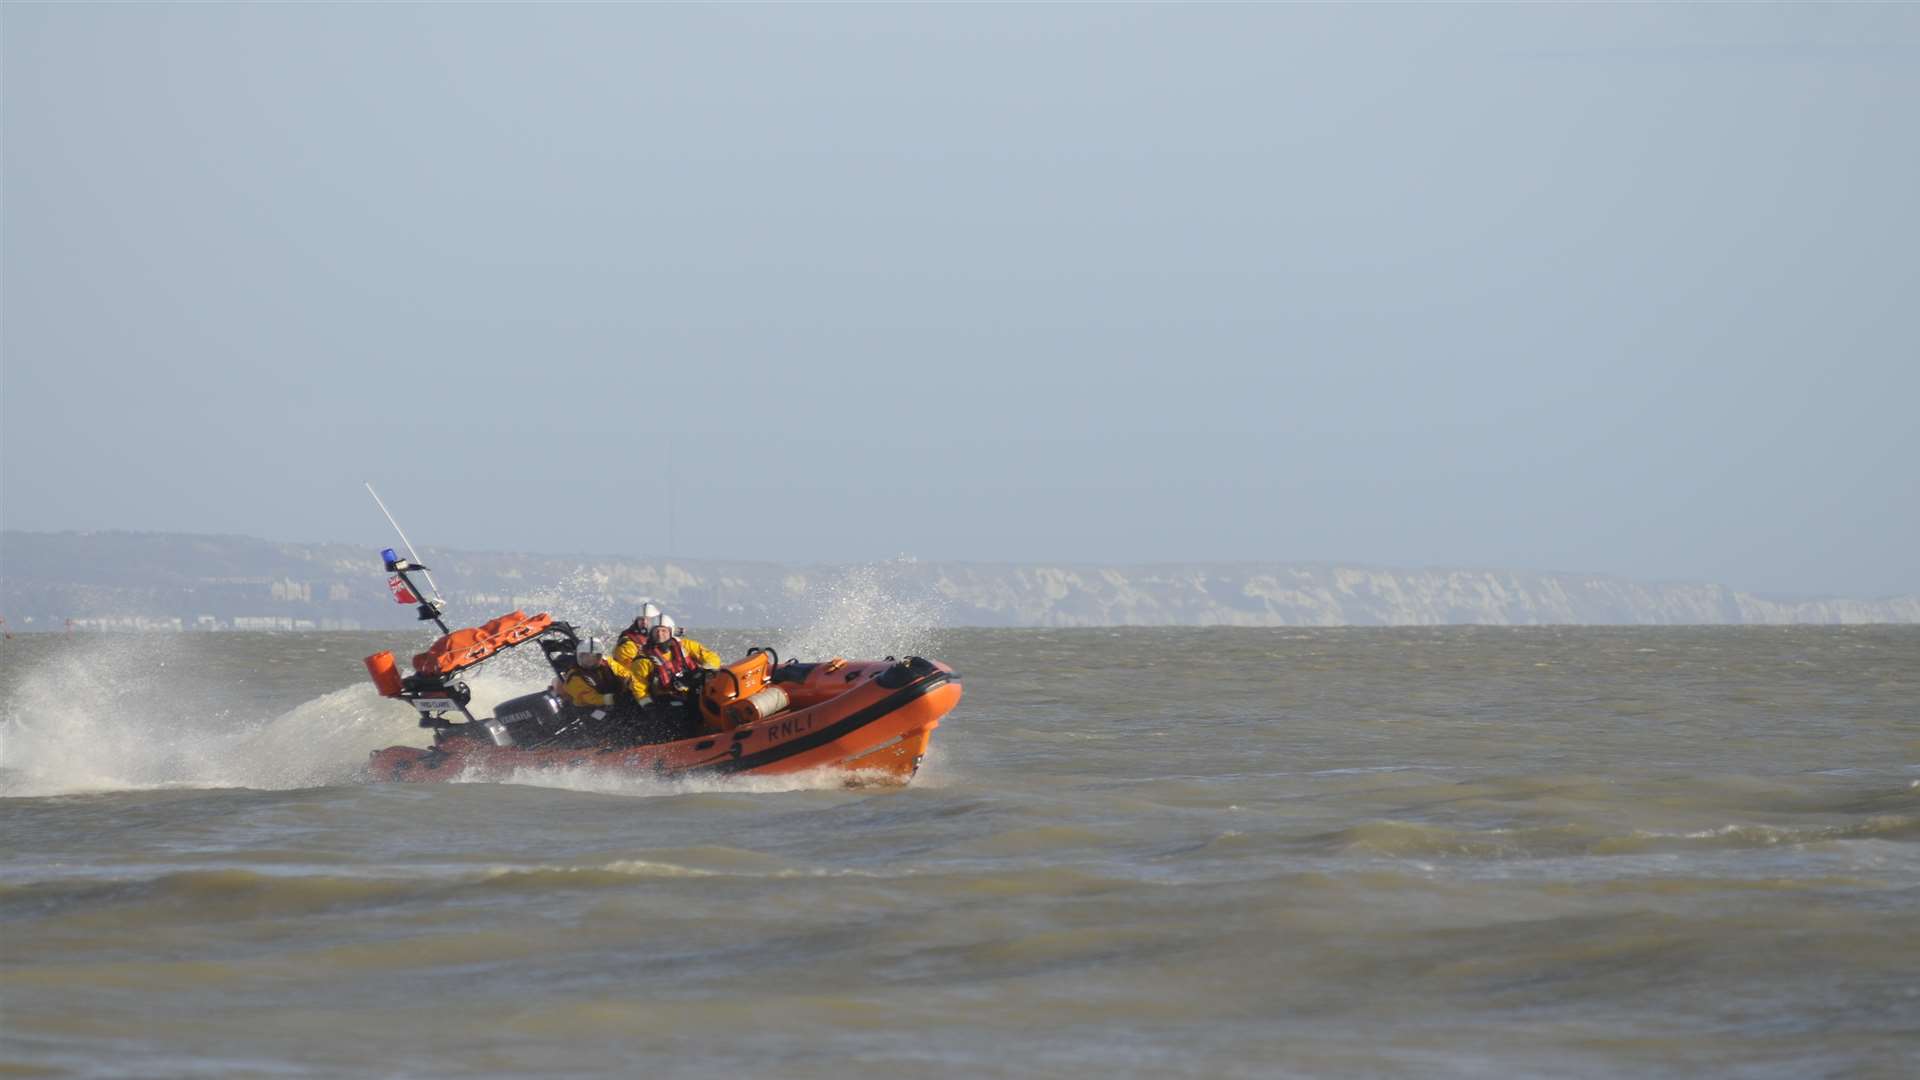 Littlestone lifeboat was launched